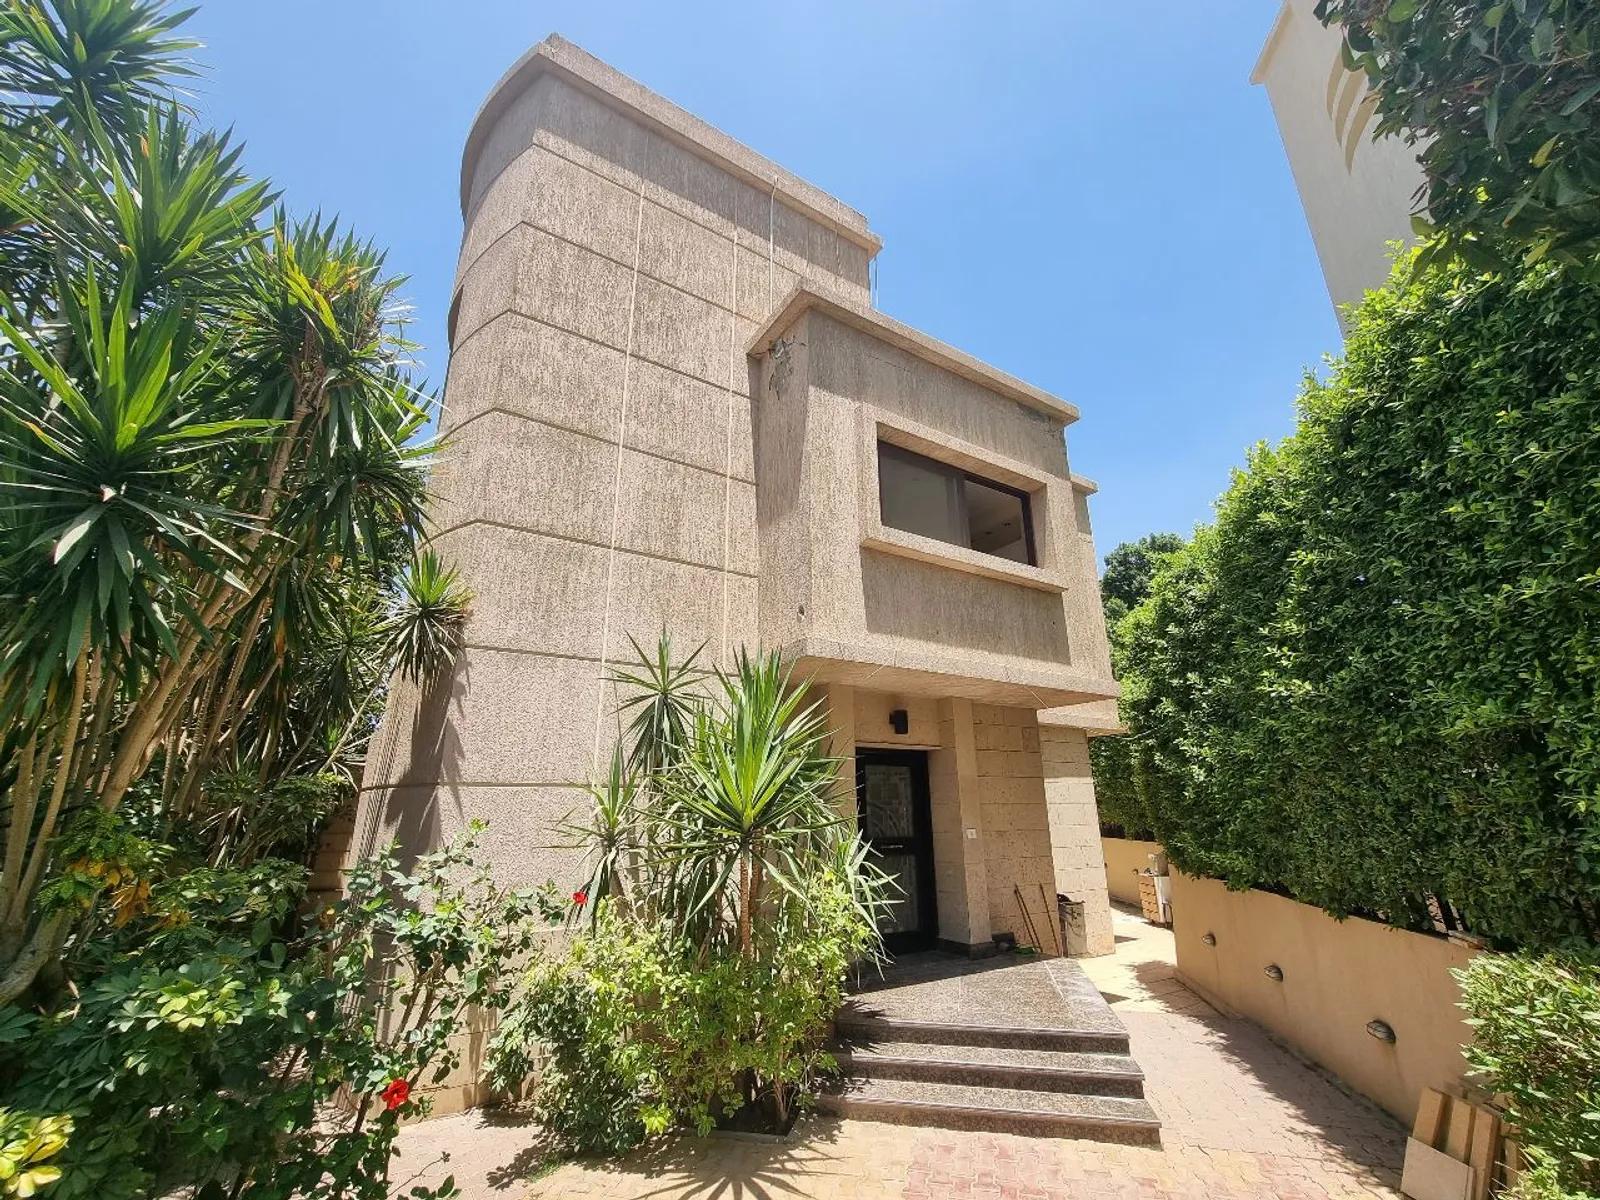 Office spaces For Sale In Maadi Maadi Degla Area: 600 m² consists of 4 Bedrooms 4 Bathrooms Semi furnished 5 stars #5722